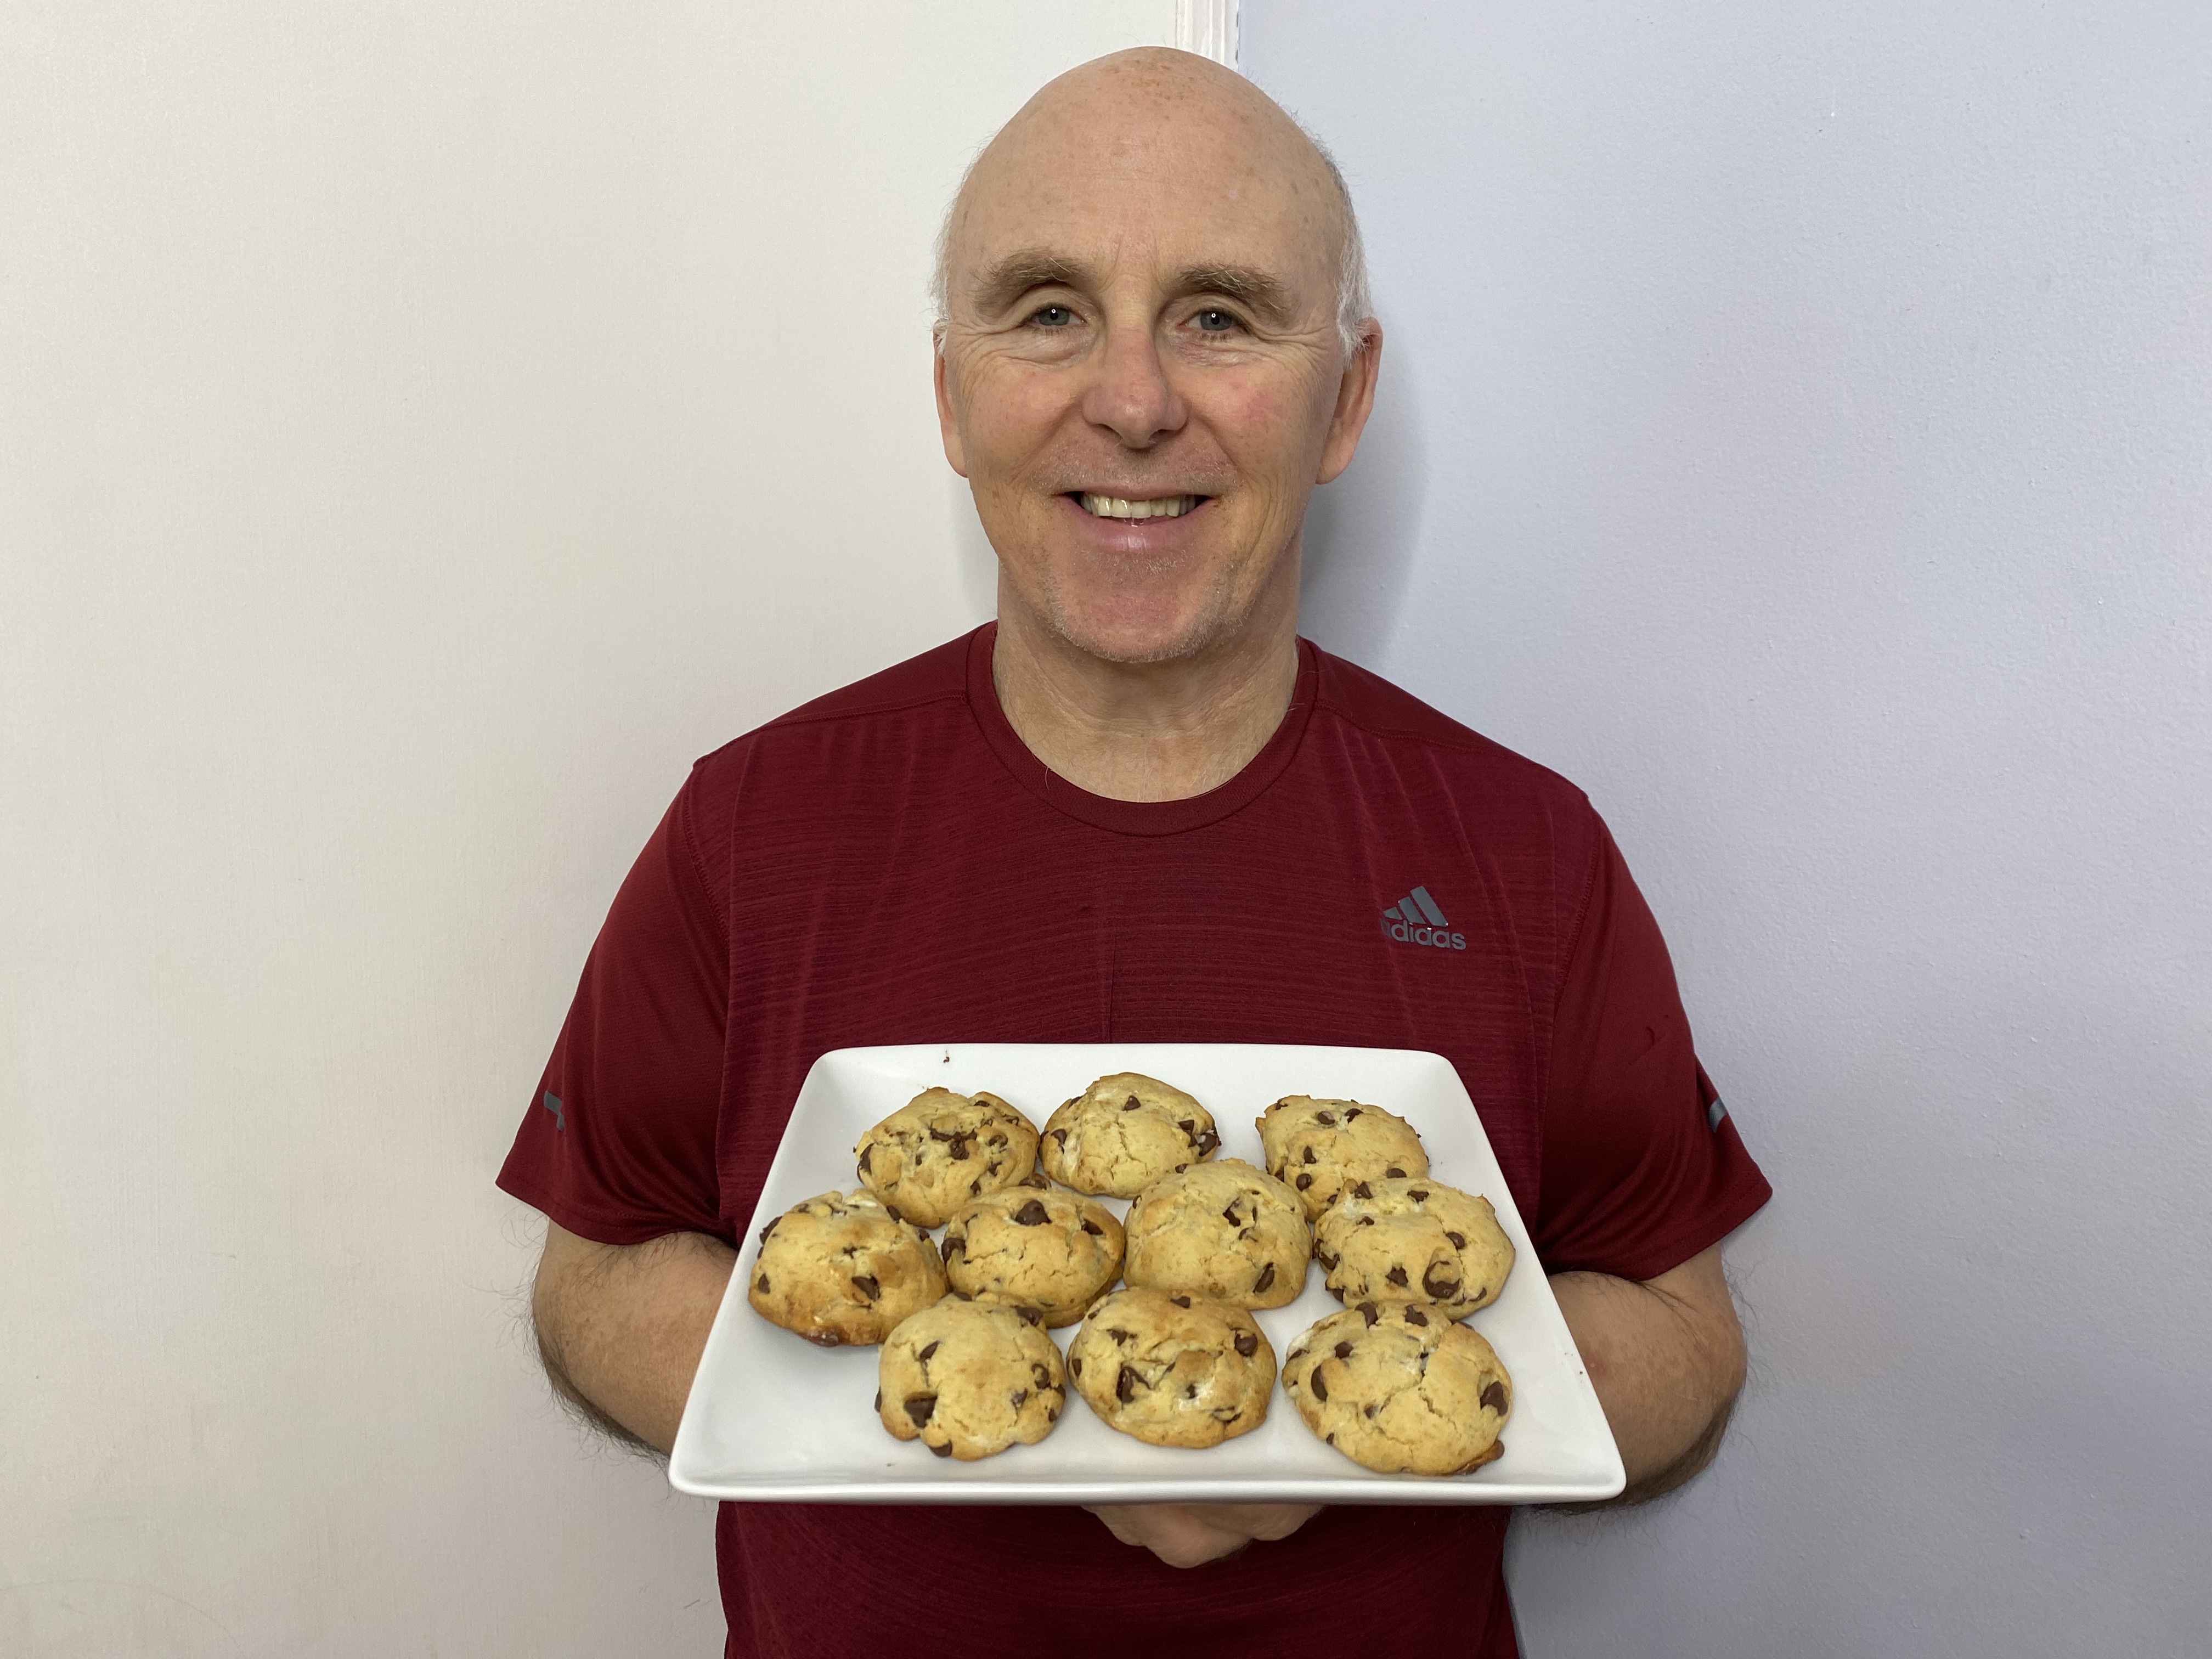 A photo of Chef Rob holding a plate of Cheesecake Stuffed Chocolate Chip Cookies.